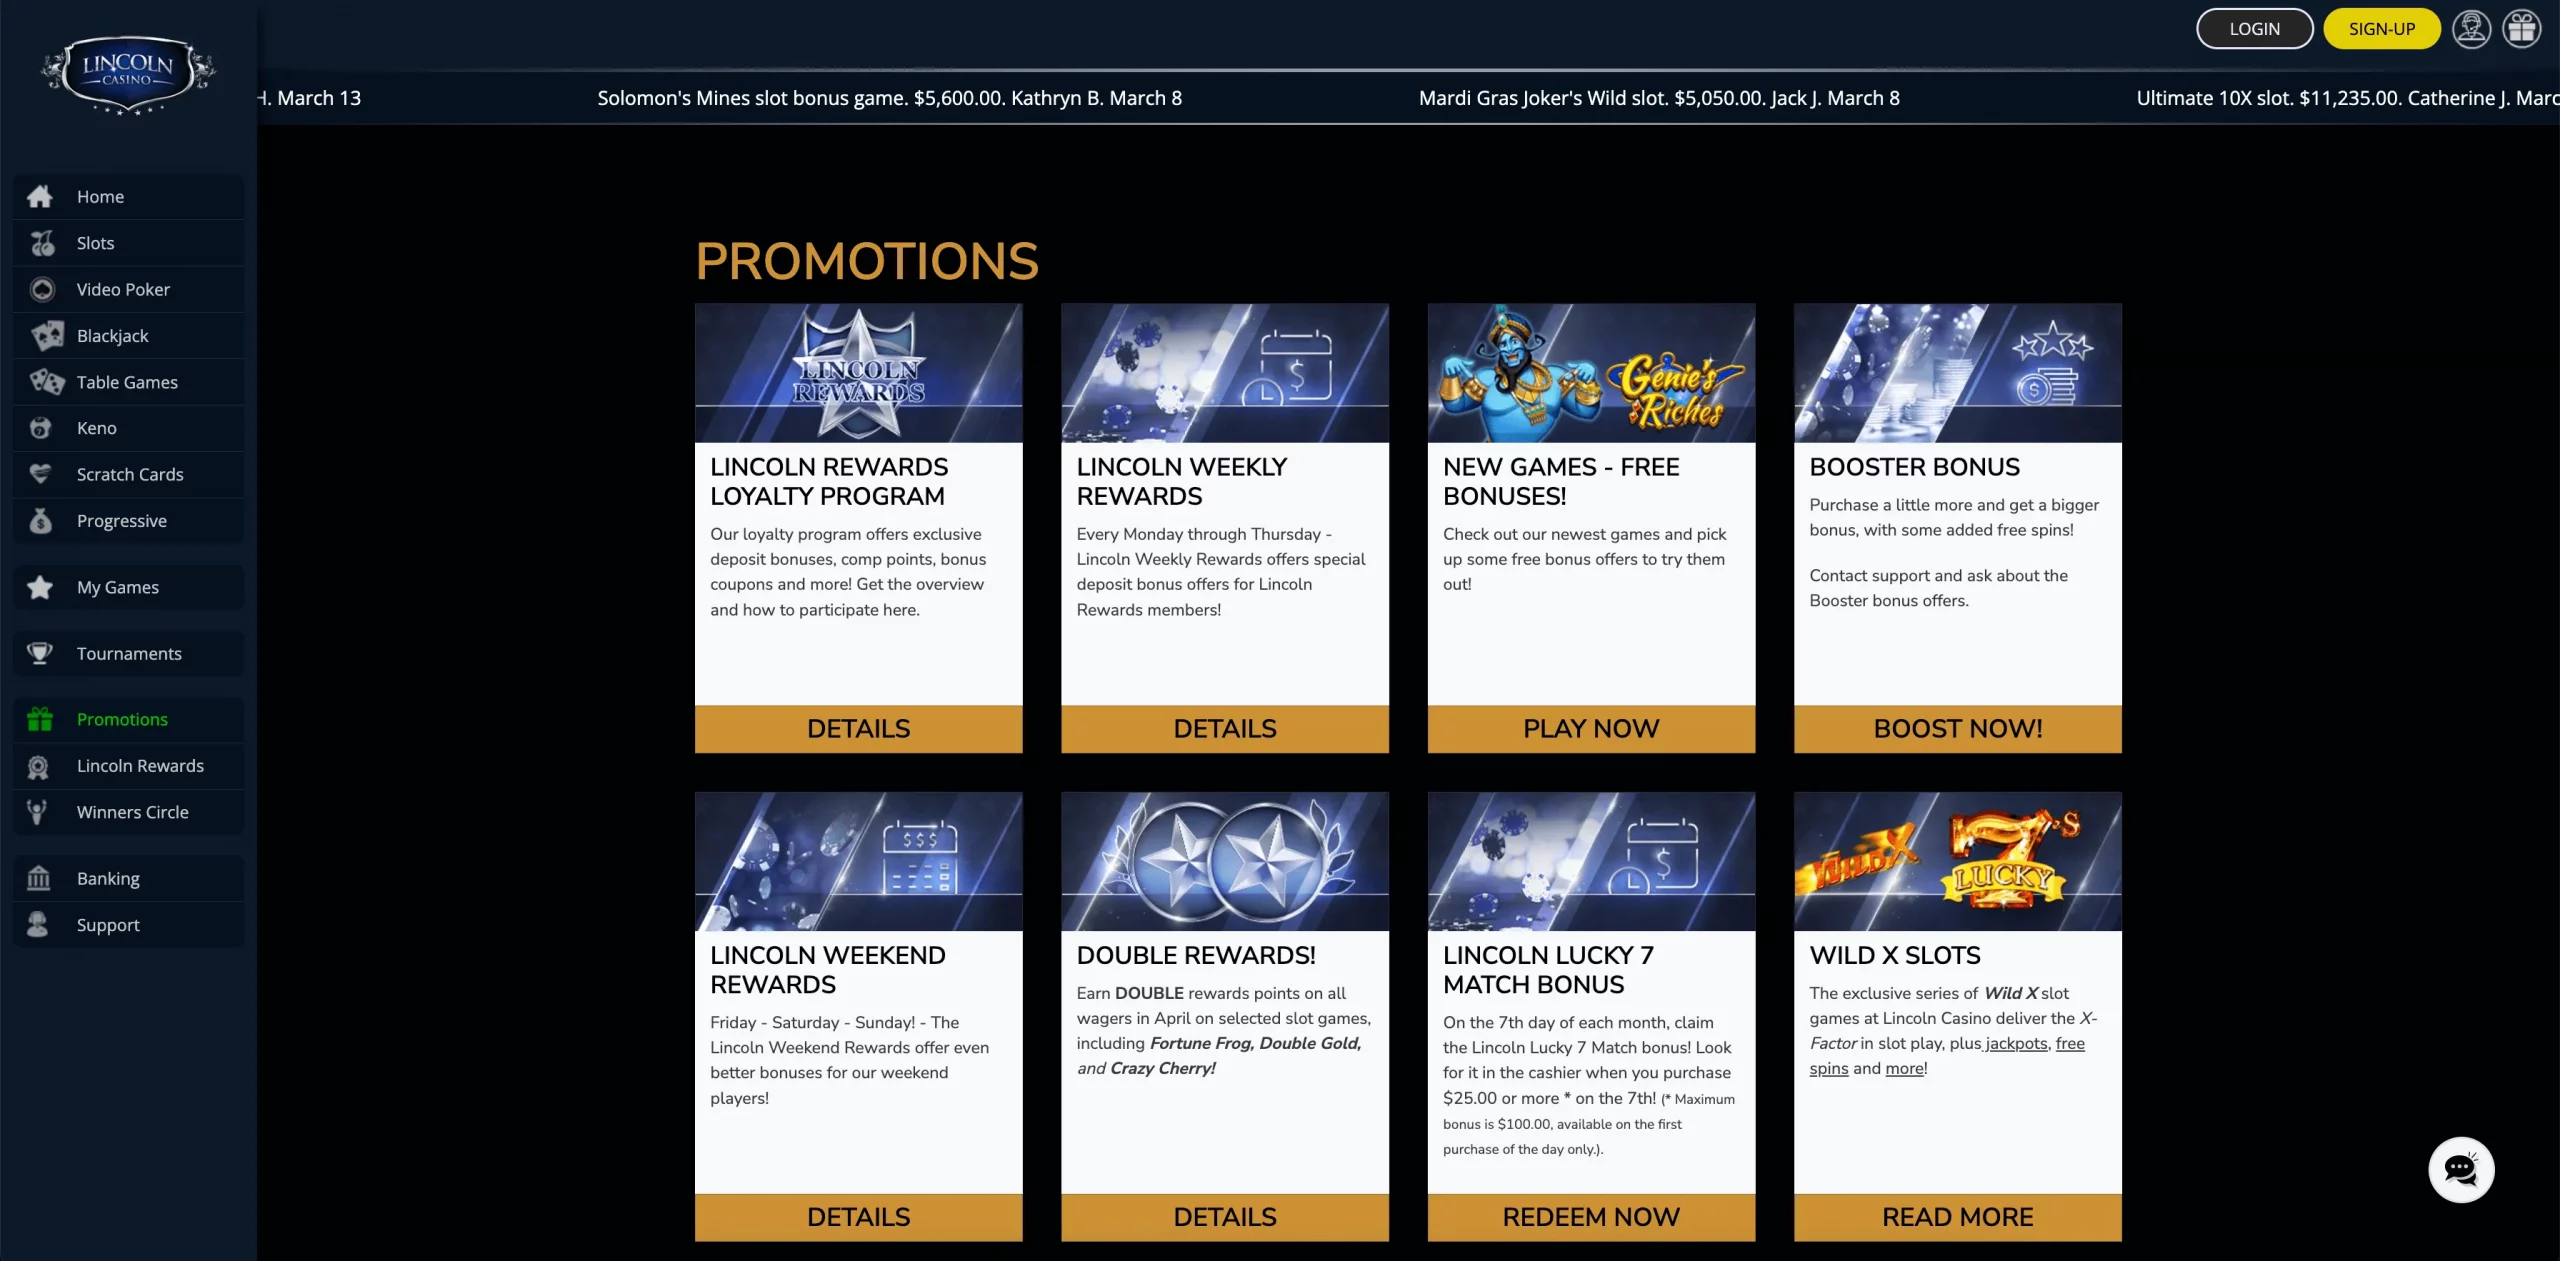 Lincoln Casino usa promotions